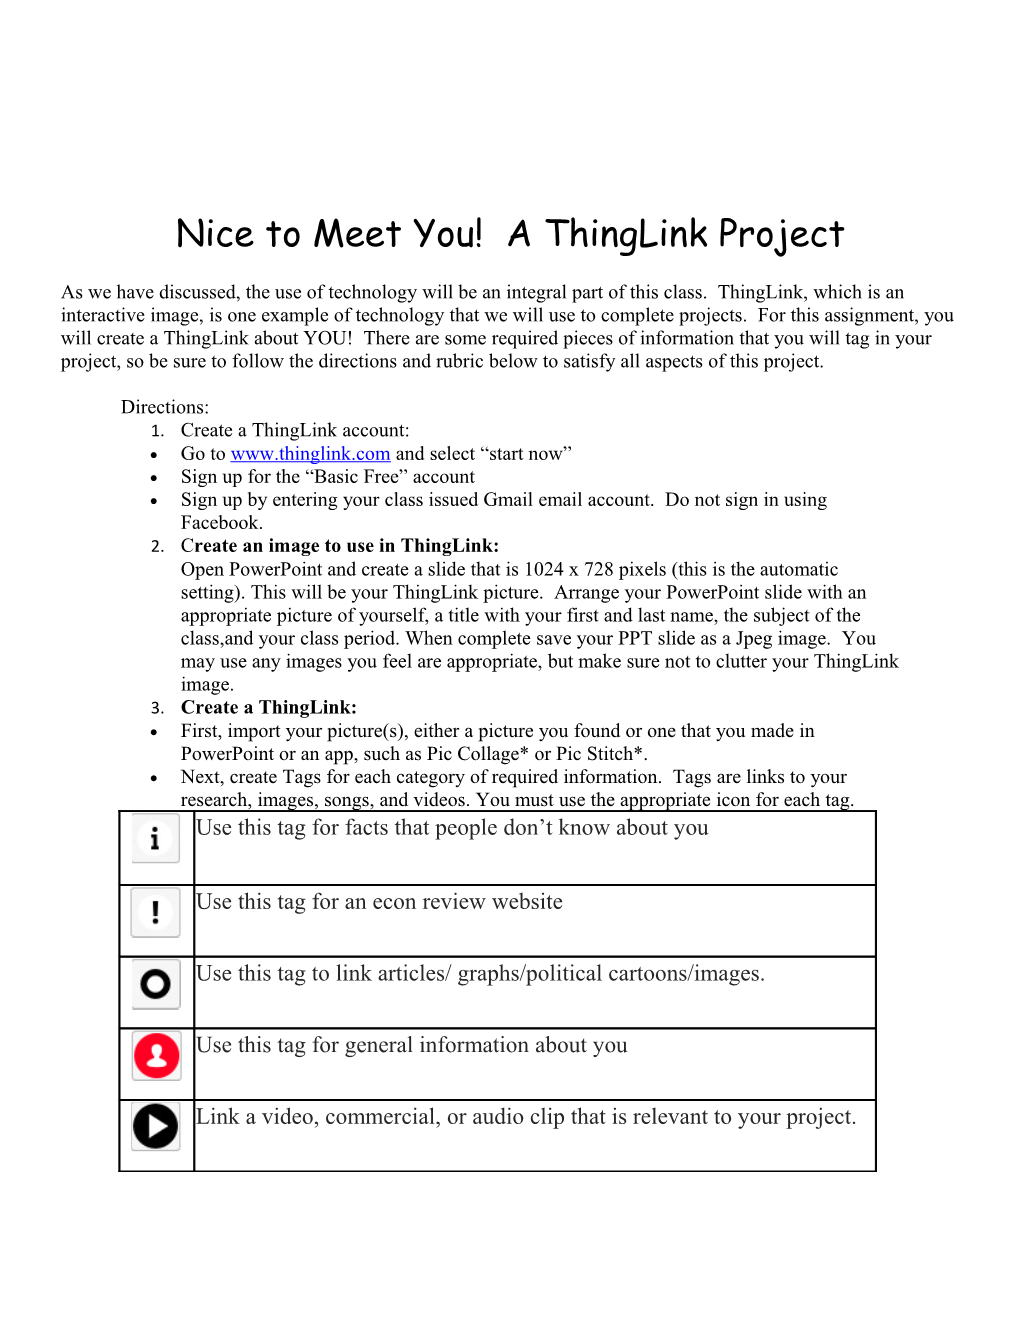 Nice to Meet You! a Thinglink Project